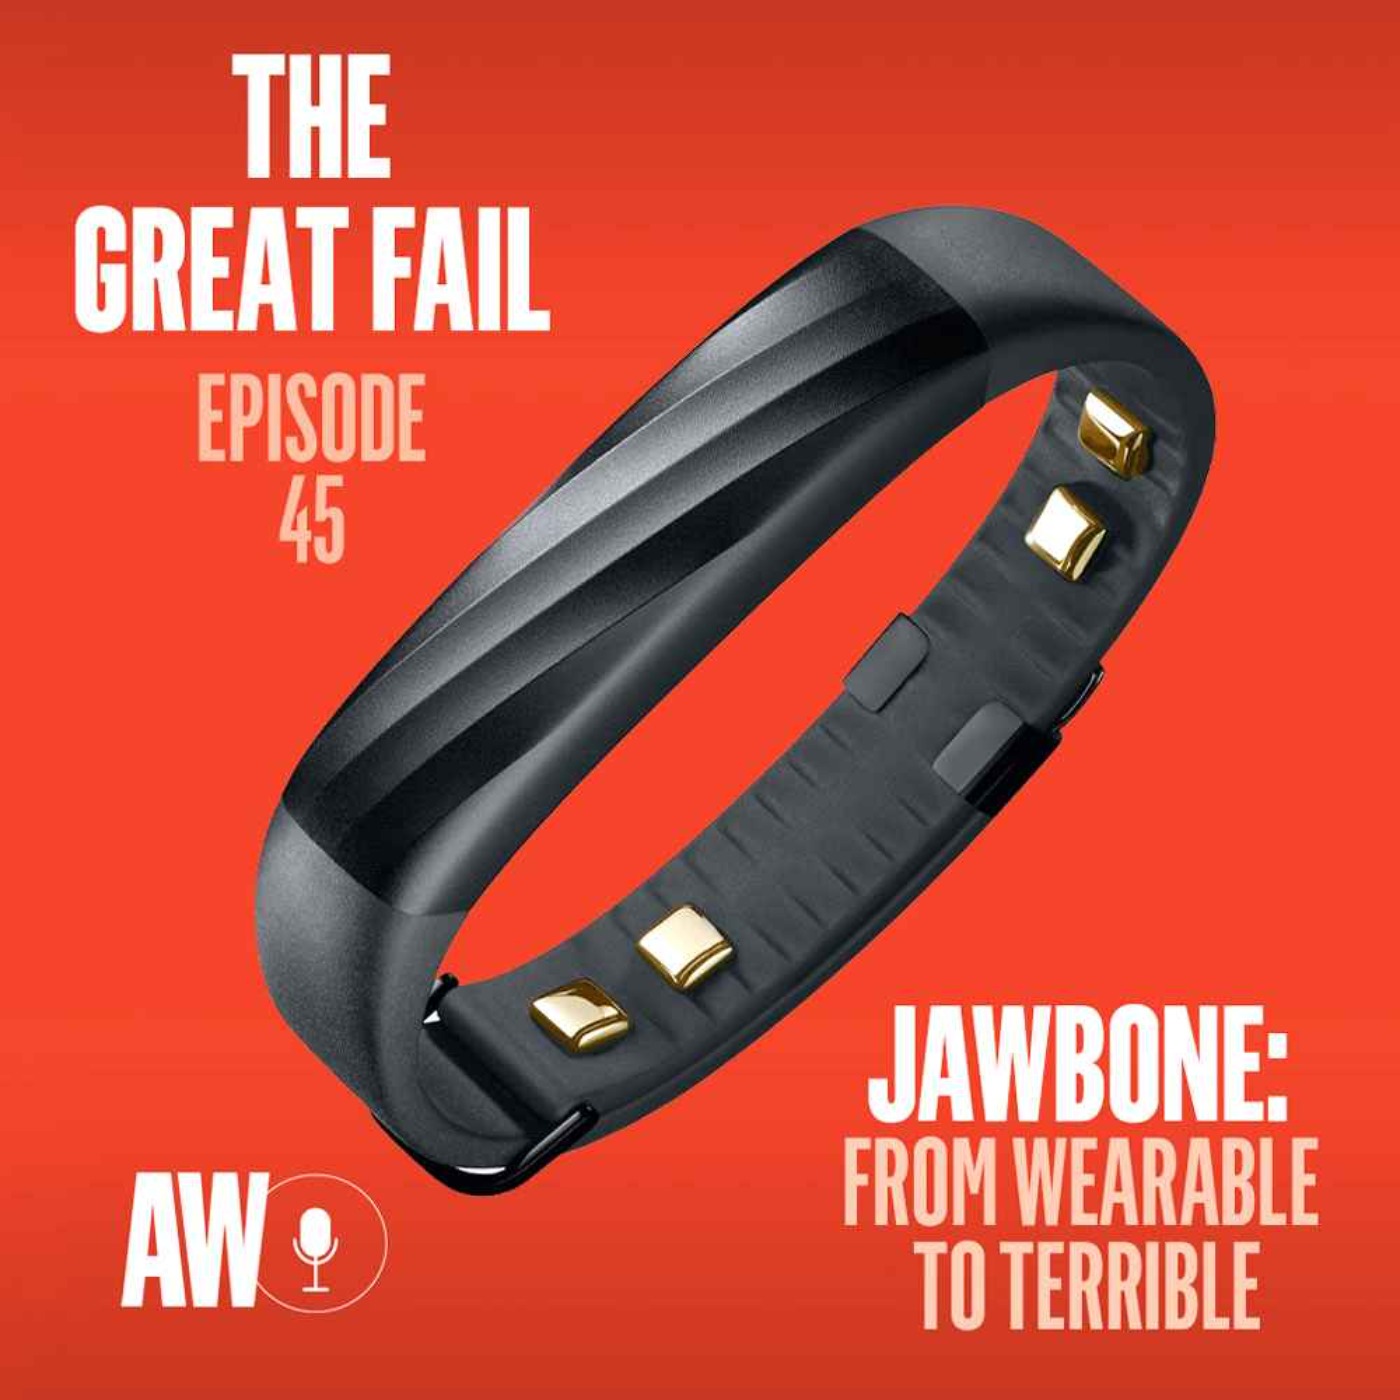 Episode 45: How Jawbone went from Wearable to Terrible